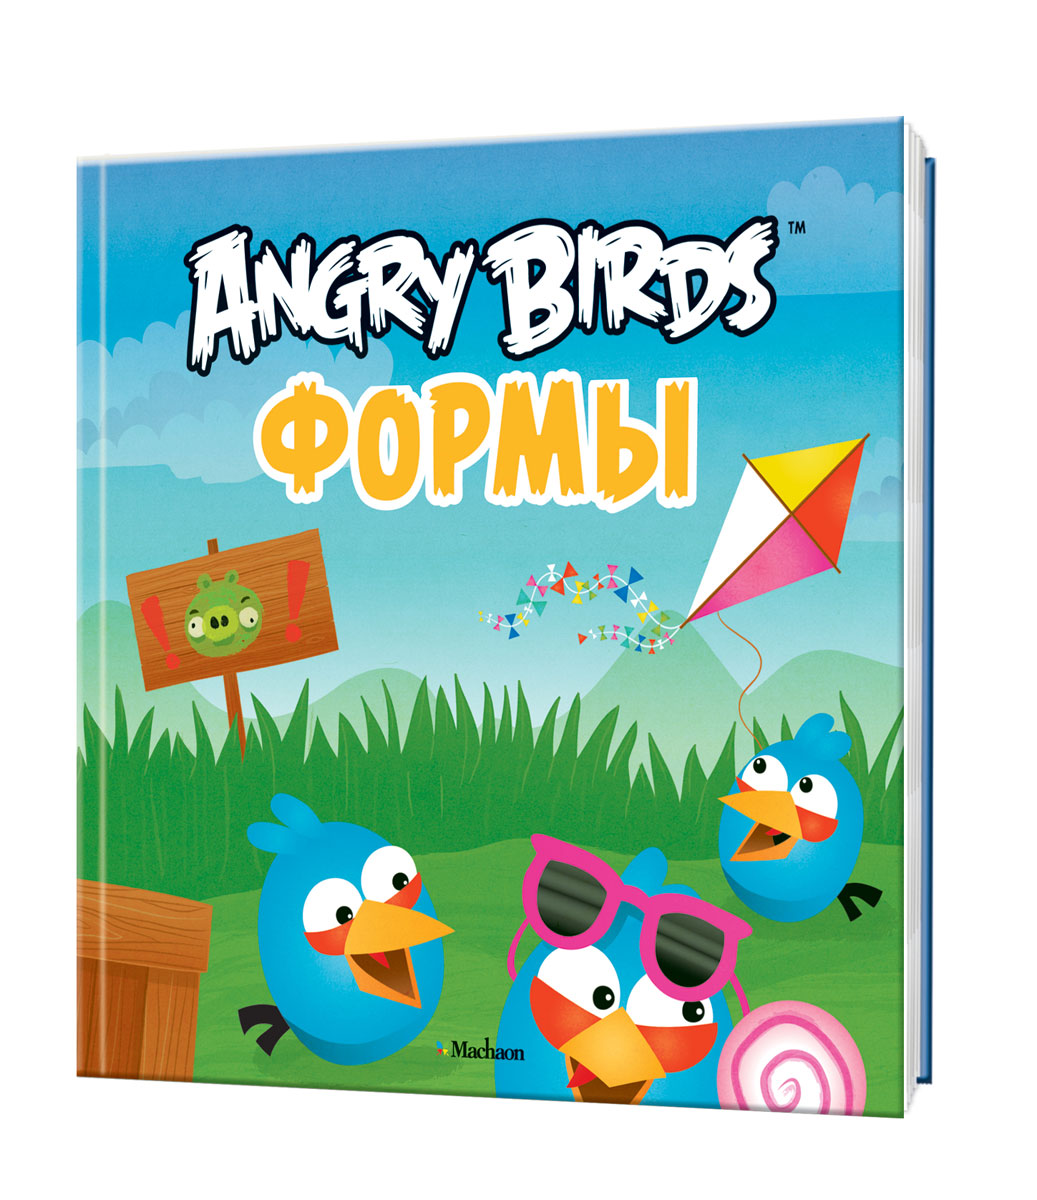 Forms birds. Angry Birds книжки. Angry Birds. Кто, где, куда?. Angry Birds книга Умка. Angry book.